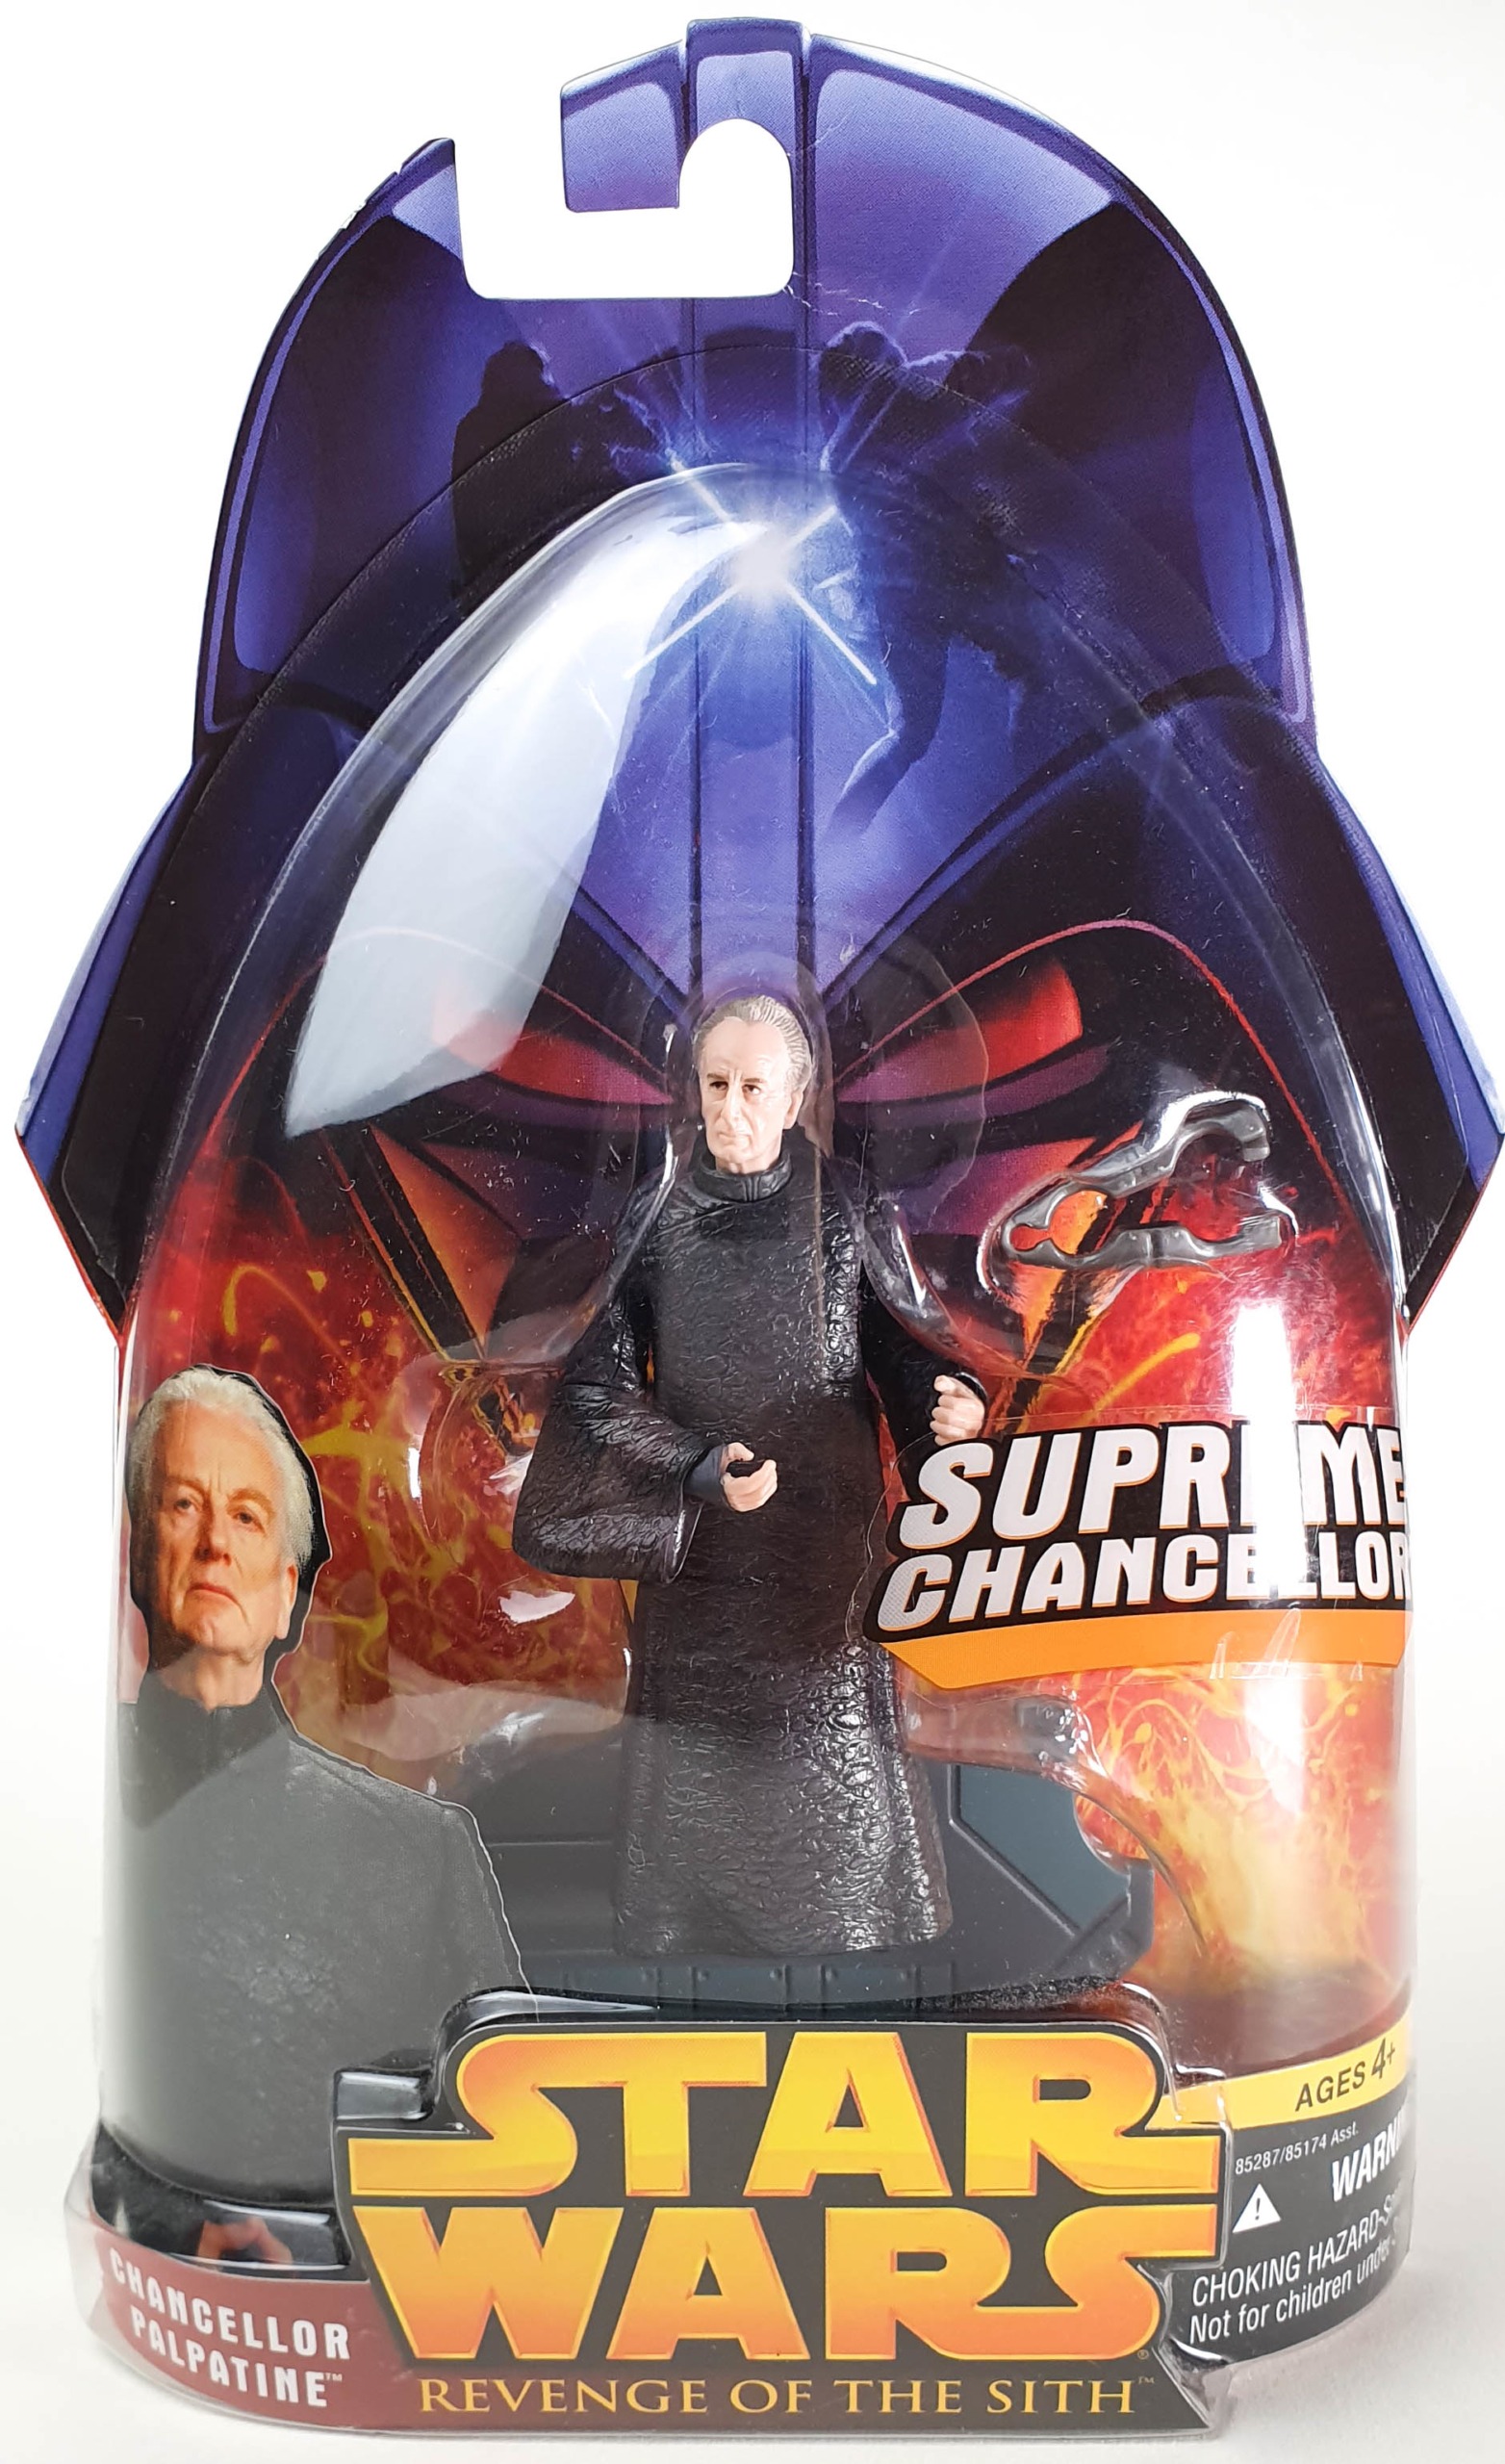 Star wars Chancellor Palpatine  revenge of the sith action figure 2005 carded 